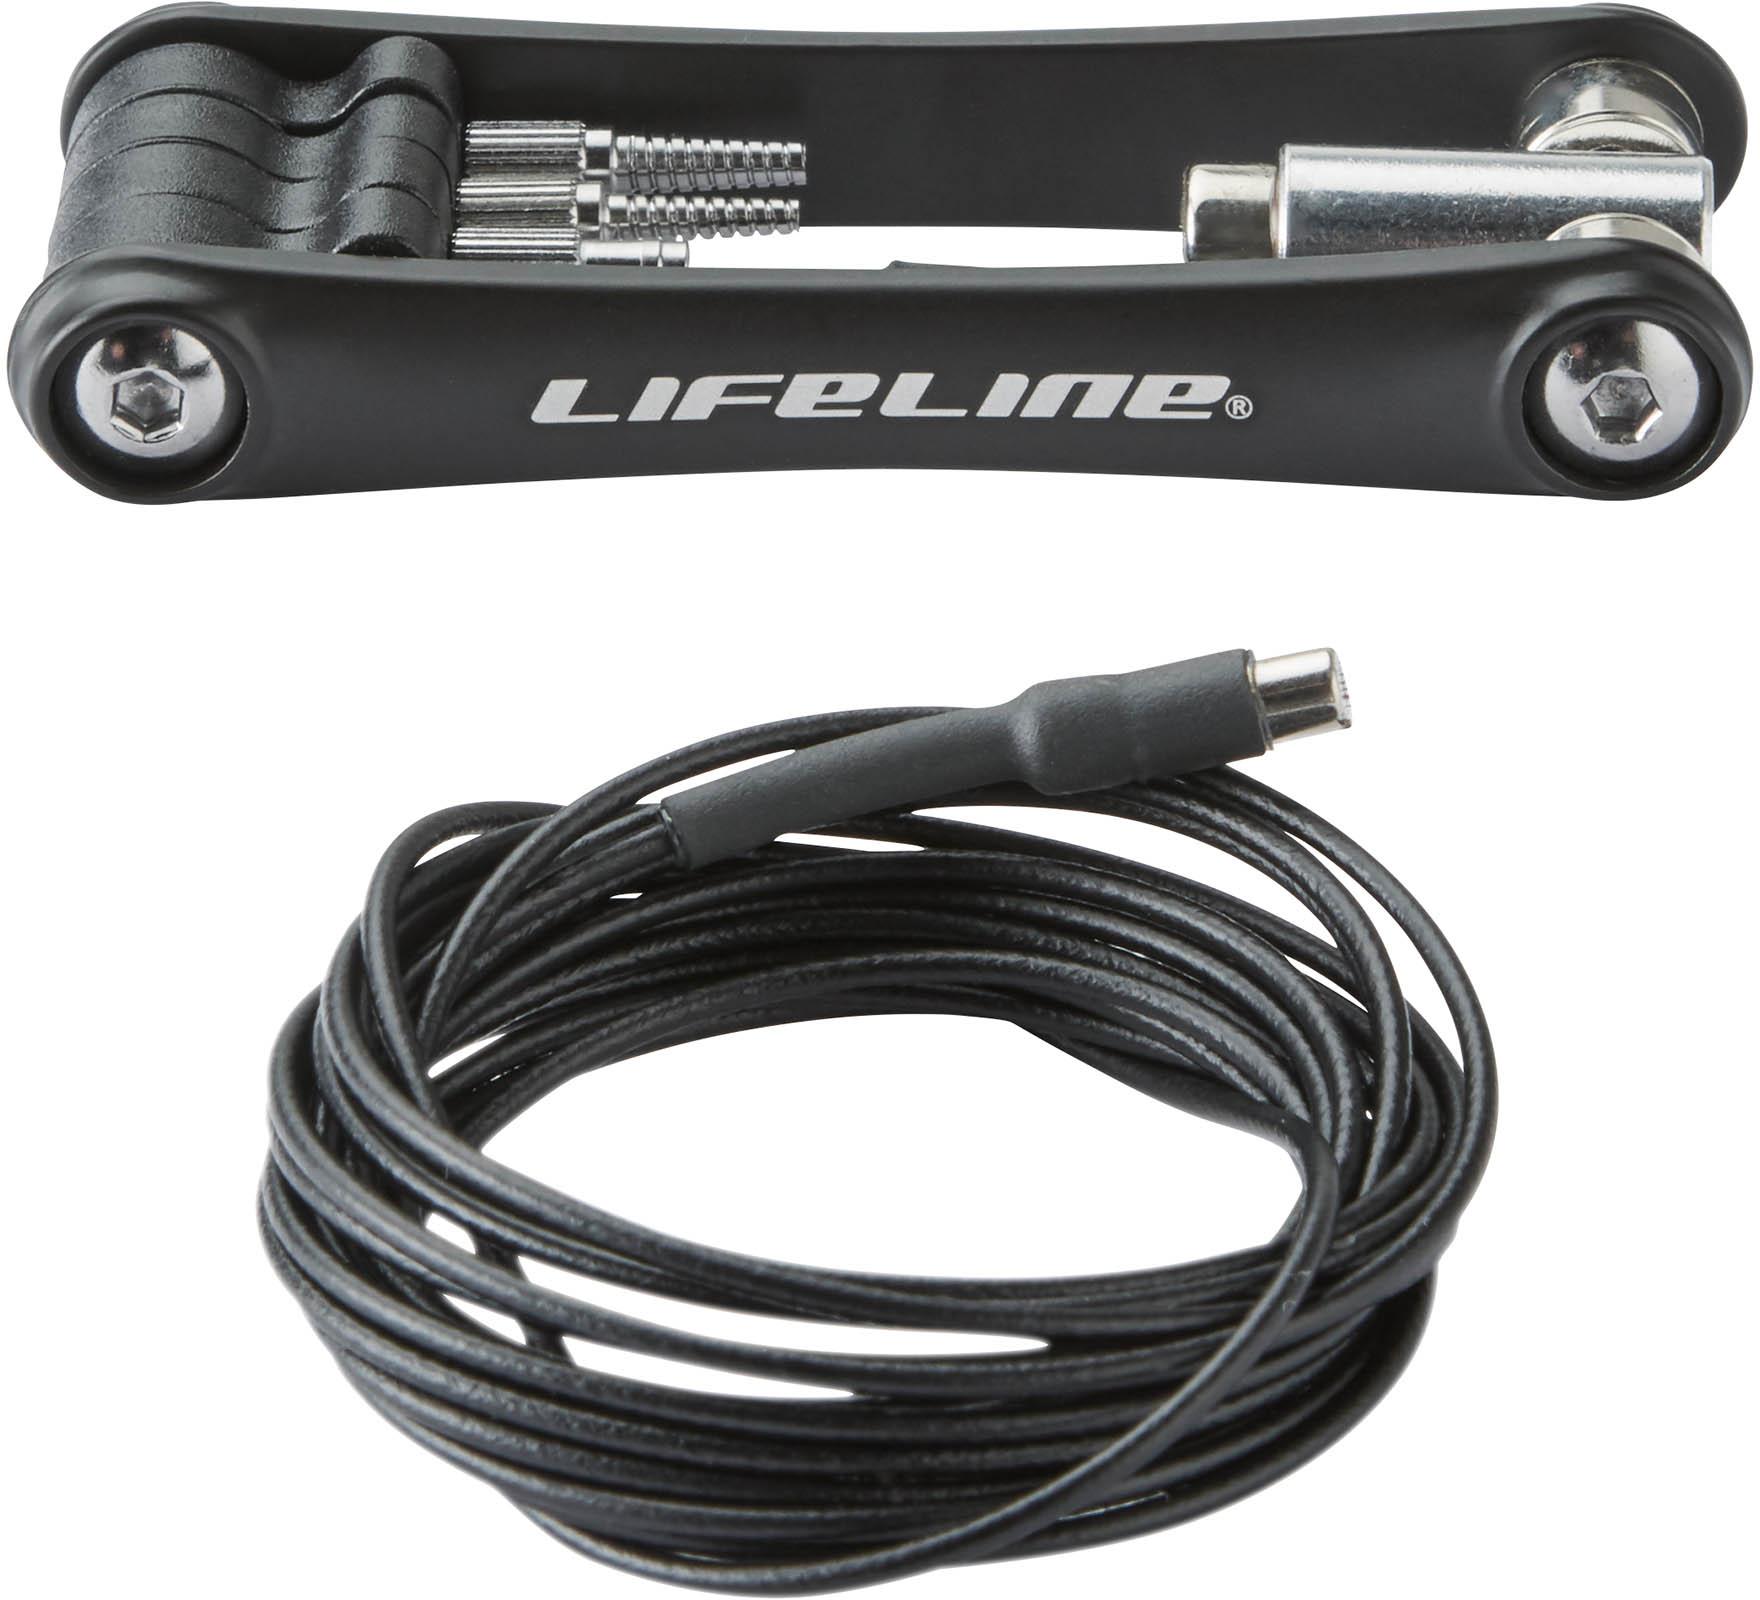 Lifeline Internal Cable Routing Tool - Black